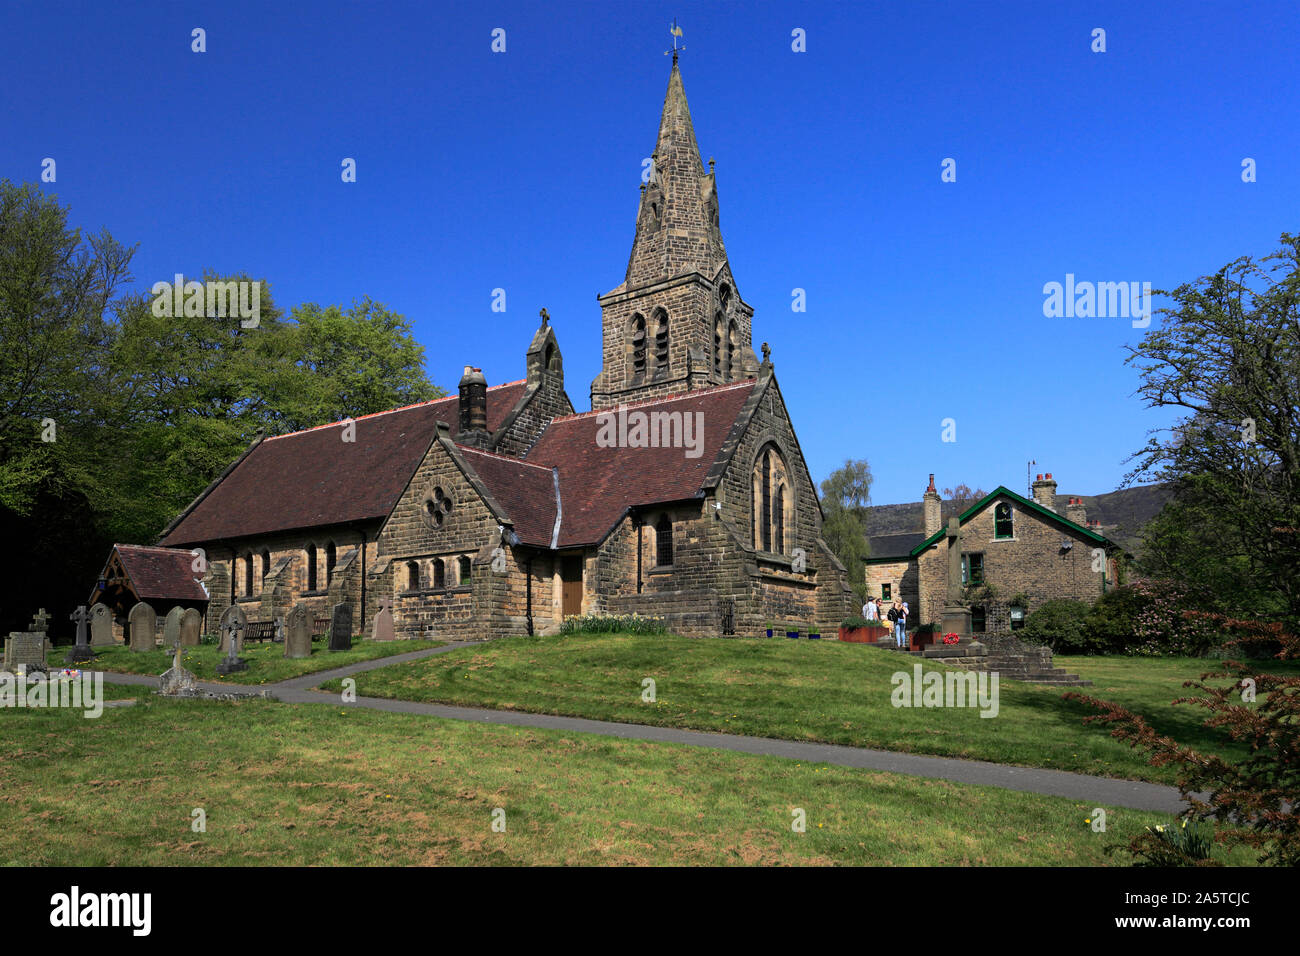 The Church of the Holy and Undivided Trinity, Edale village, Derbyshire, Peak District National Park, England, UK Stock Photo